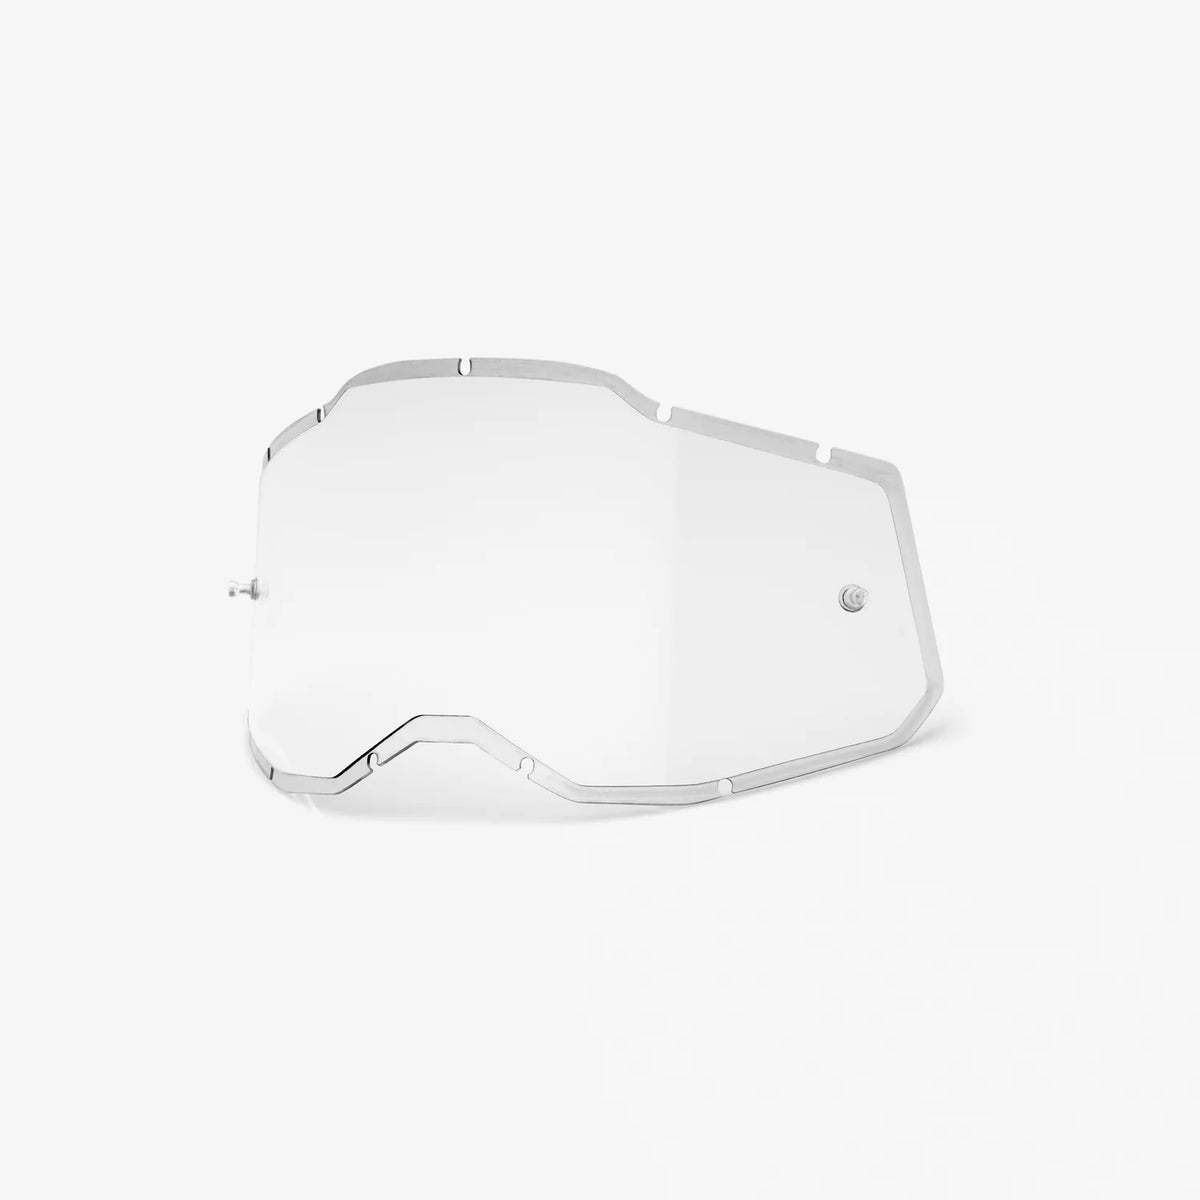 100% Racecraft 2 / Accuri 2 / Strata 2 Replacement Lens - Clear